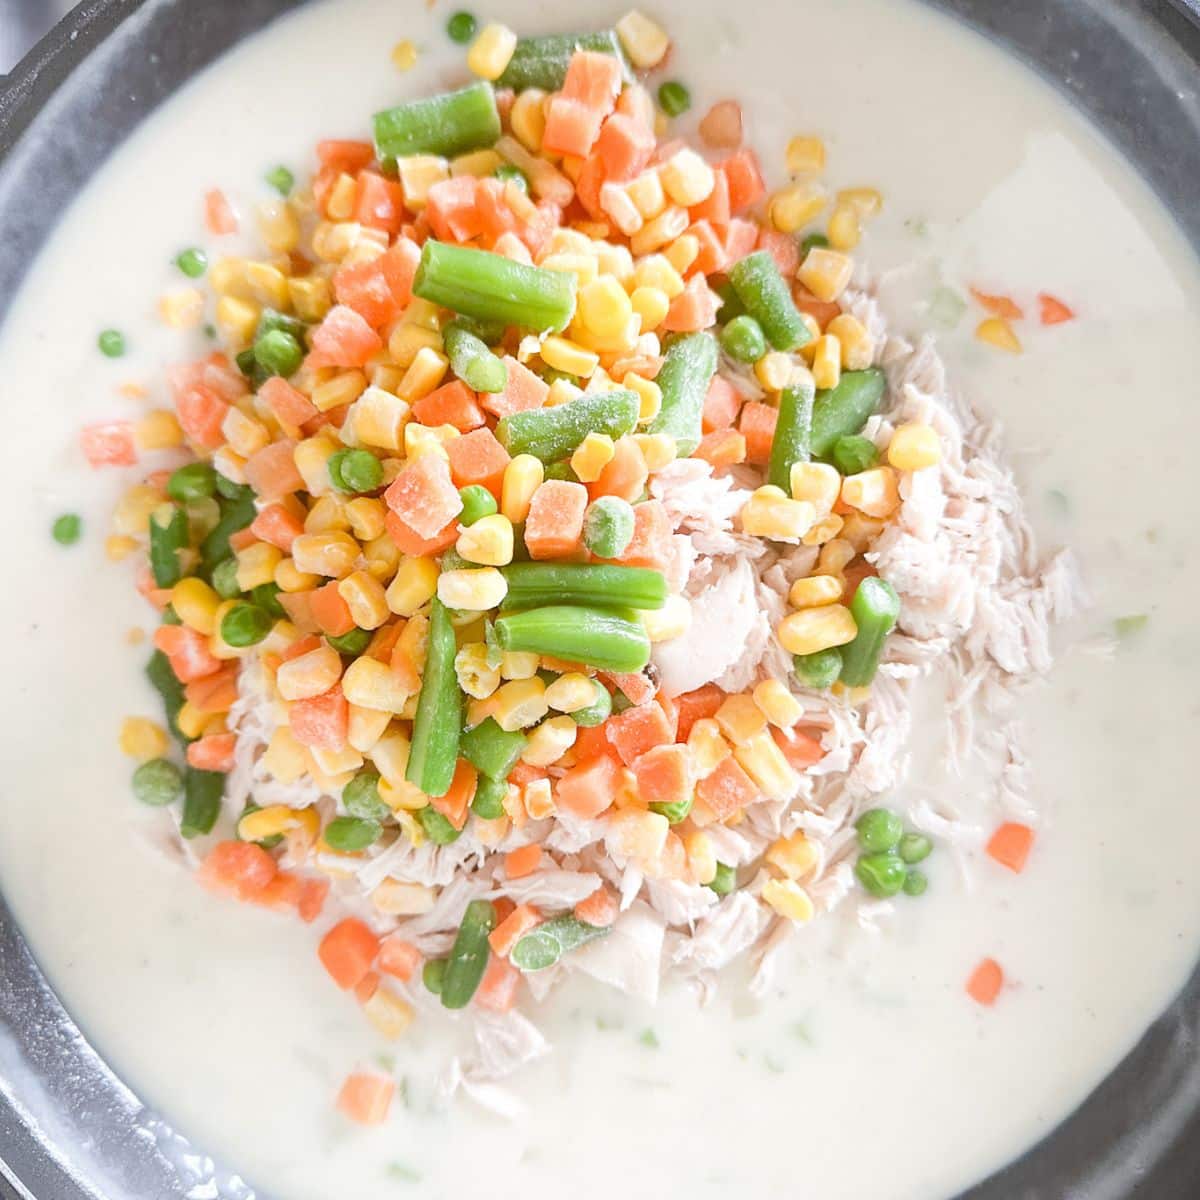 Skillet with a cream sauce, shredded chicken, and mixed vegetables.